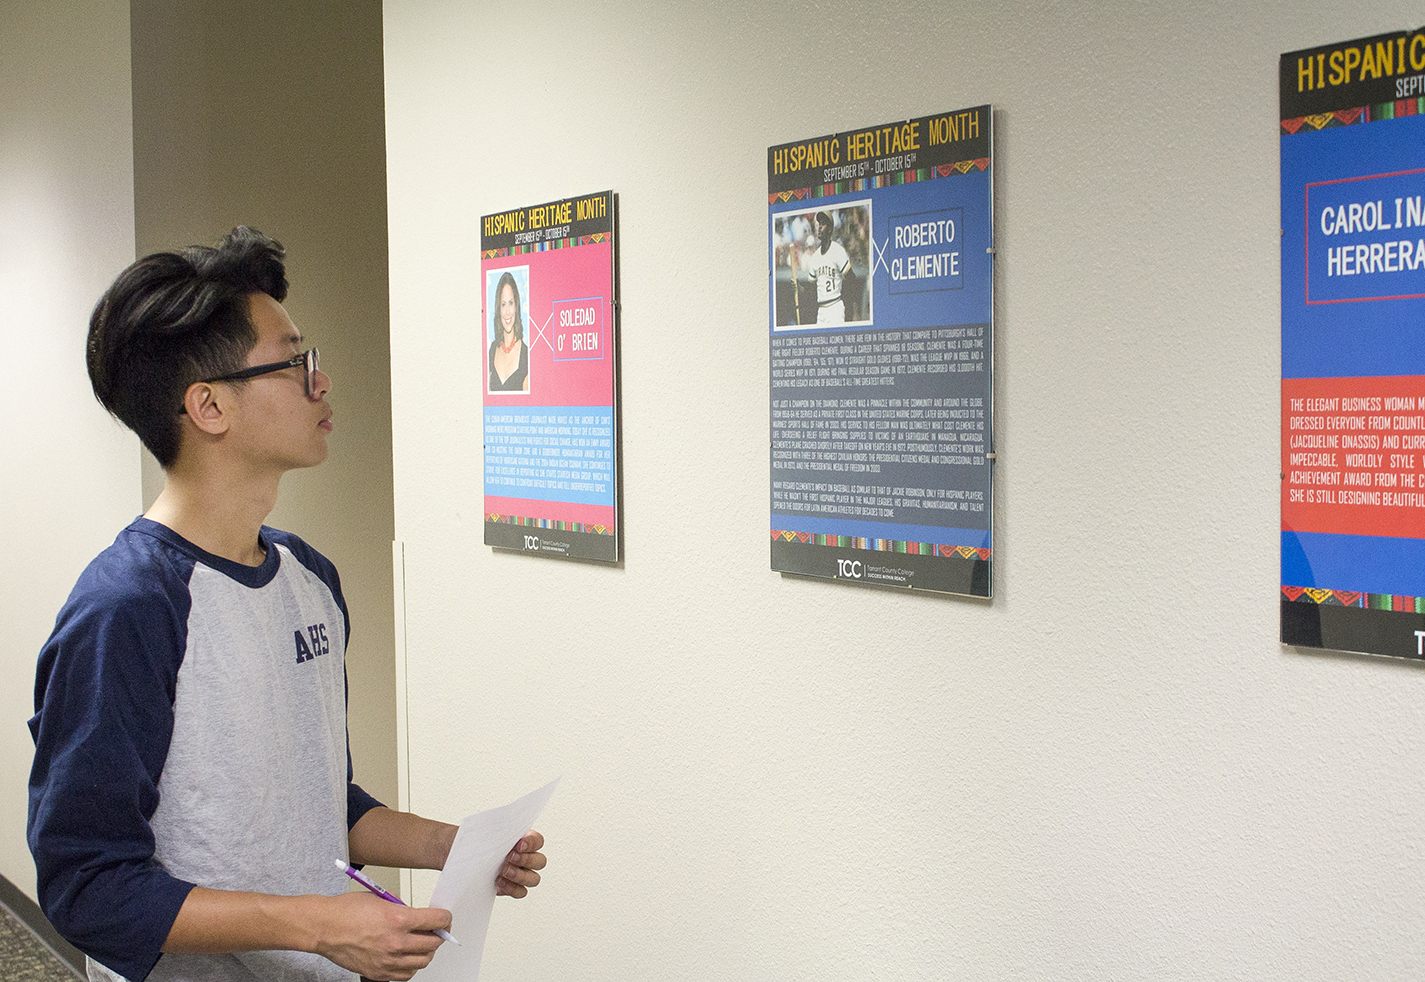 SE student Steven Nguyen looks at a poster featuring Roberto Clemente, an Hispanic baseball player, at the exhibit in Art Corridor III.